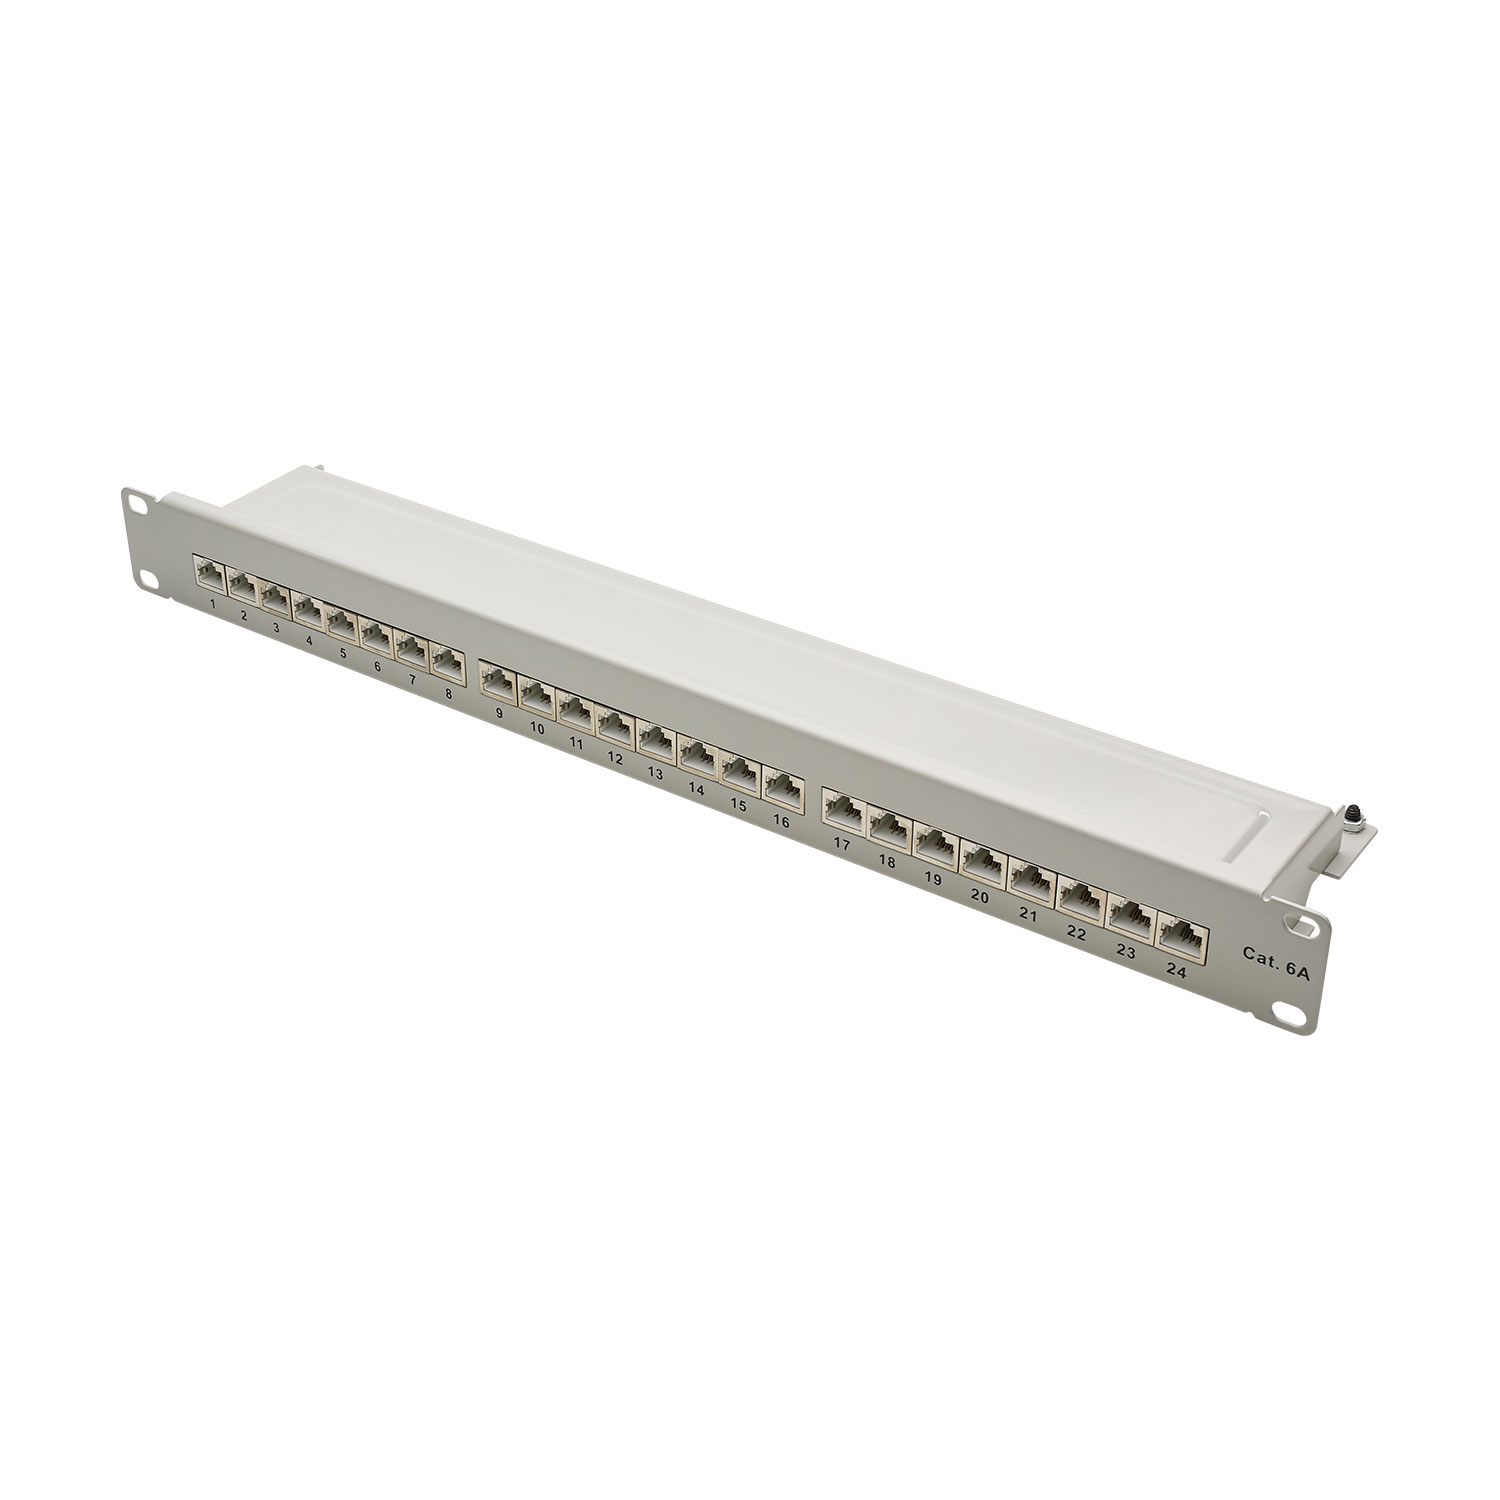 19“ PATCHPANEL, CAT.6a, 500 MHz, 1 HE, backward compatible with CAT.5e and CAT.6